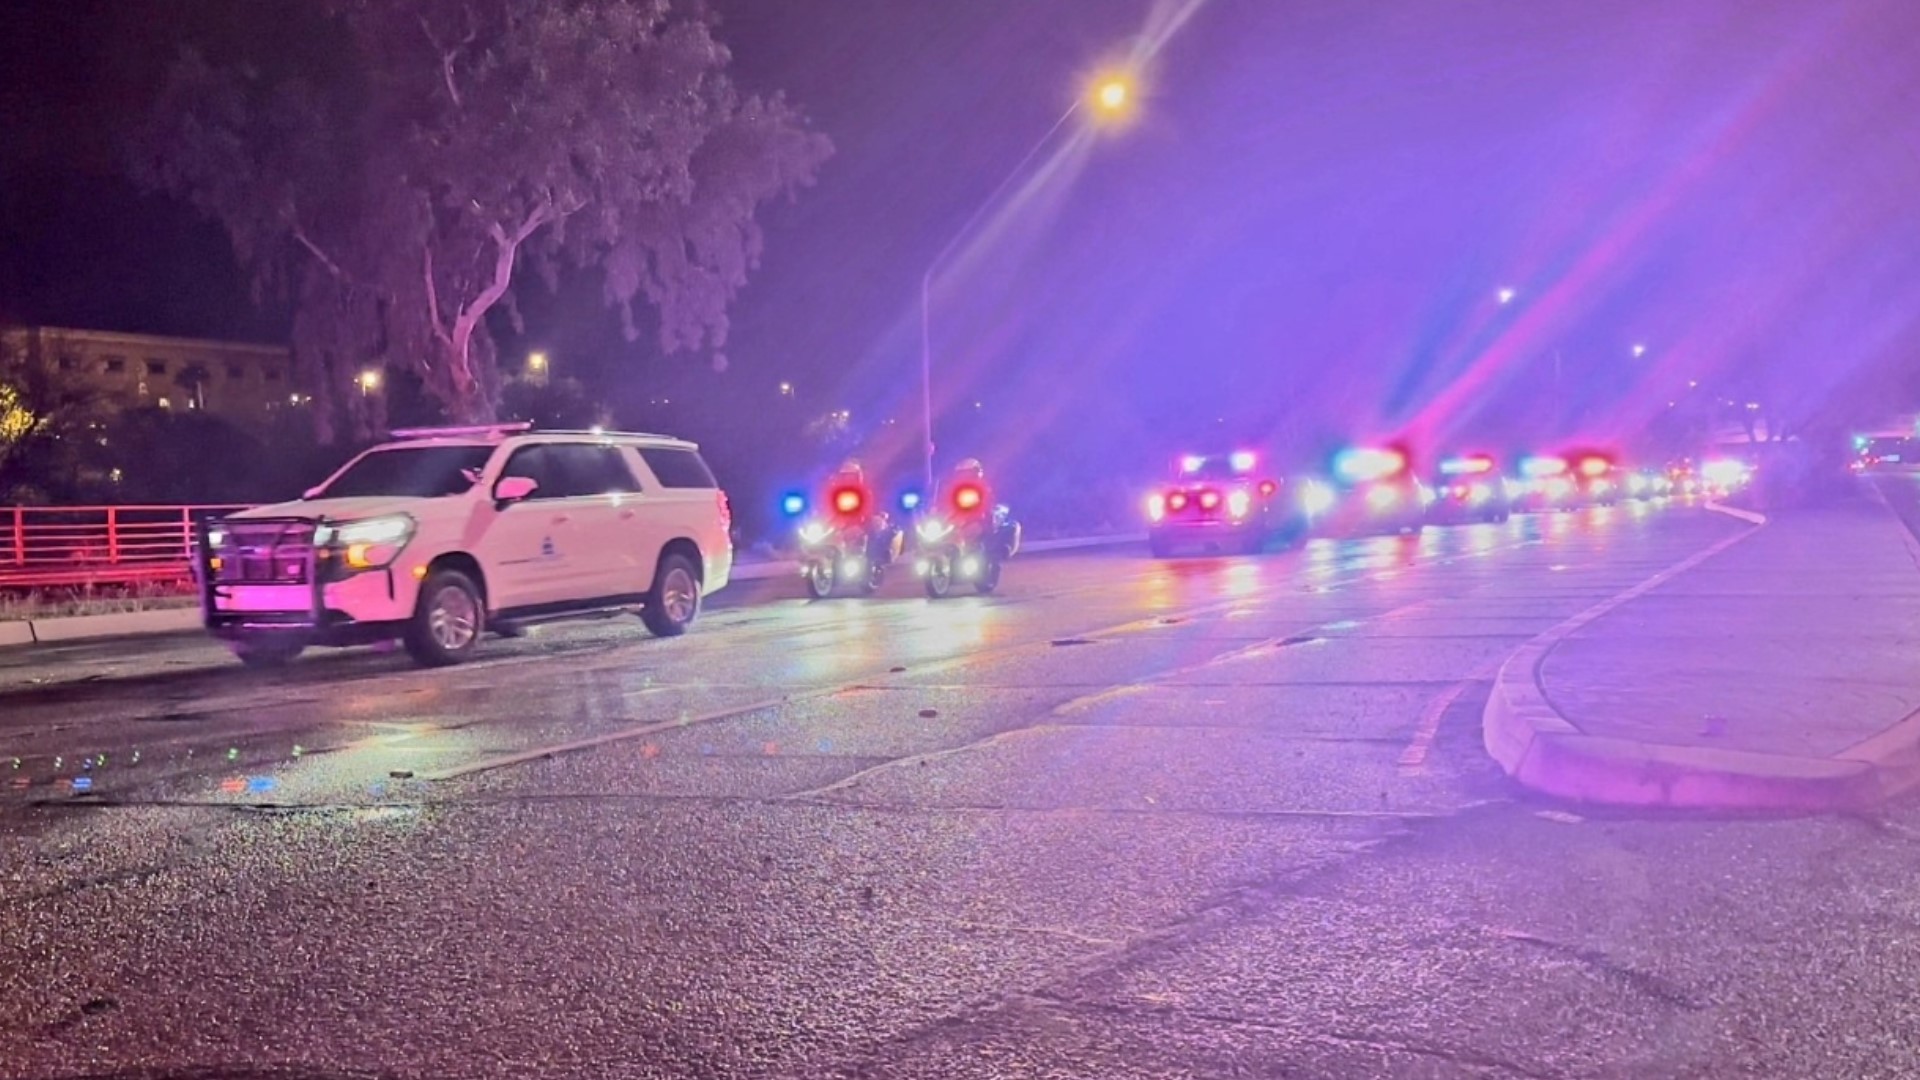 The fatal crash happened near Campbell Avenue and 6th Street, Tucson police said on social media.